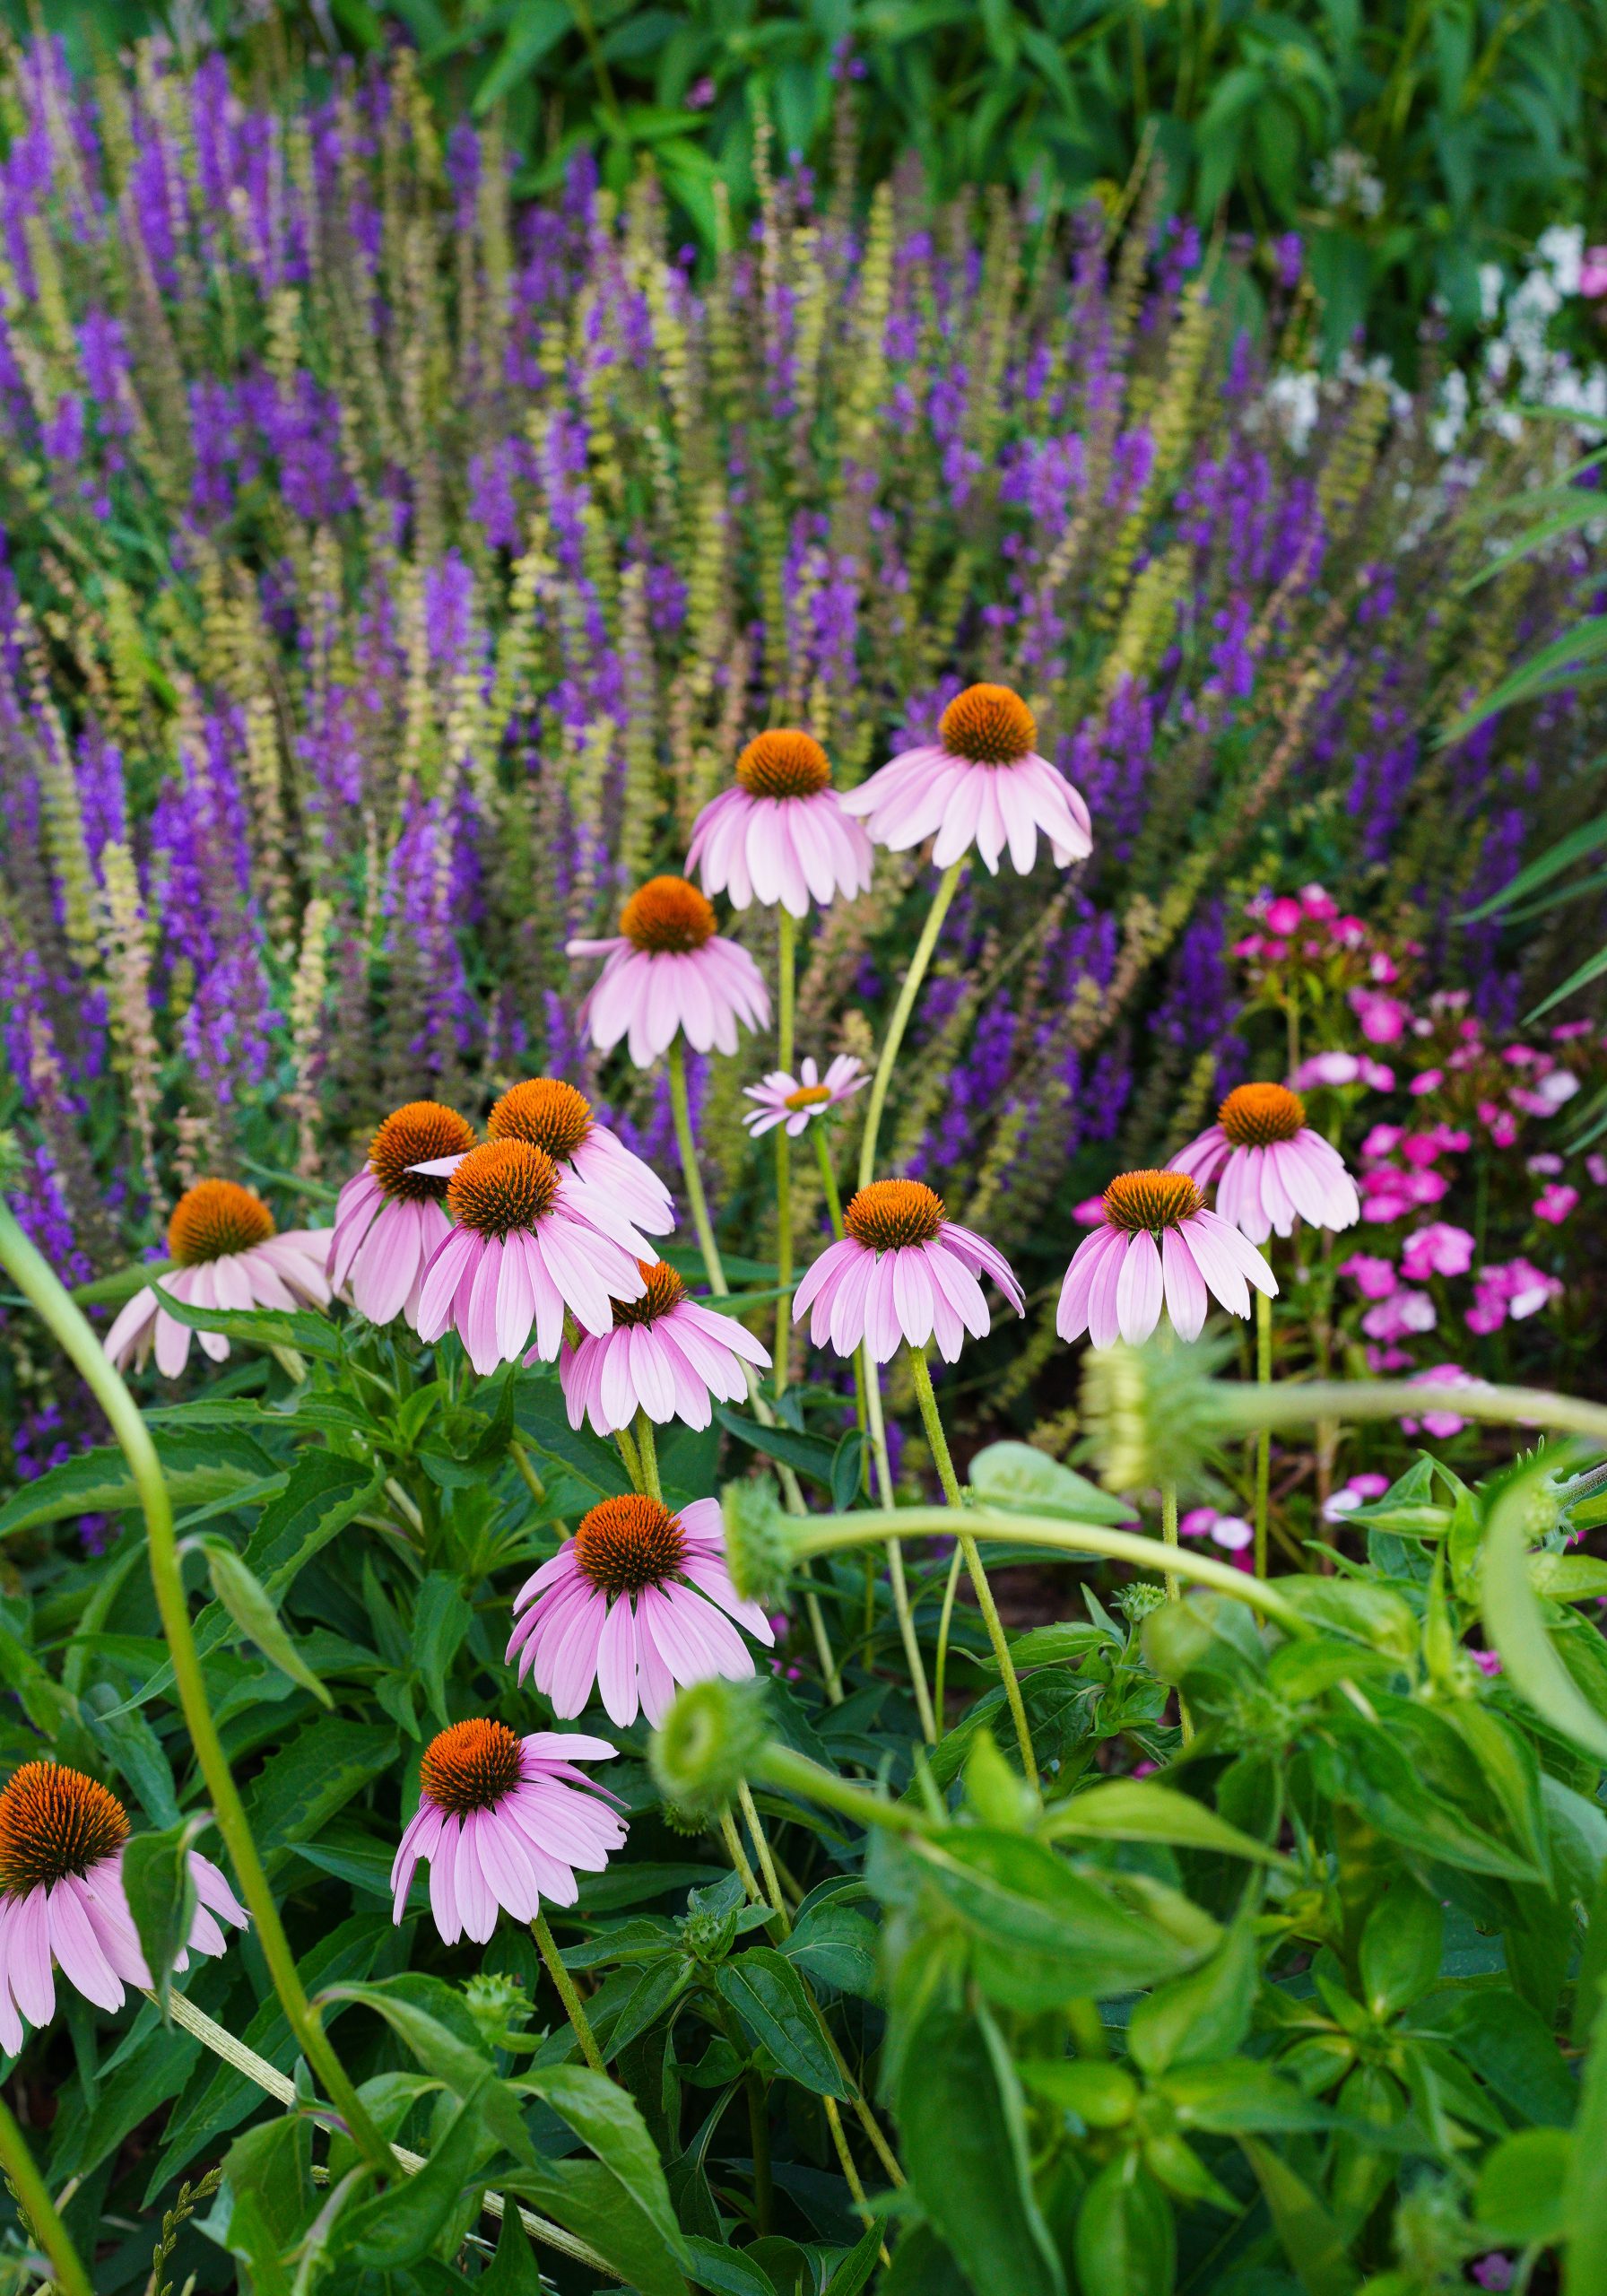 Purple coneflowers attract butterflies, hummingbirds, and bees.